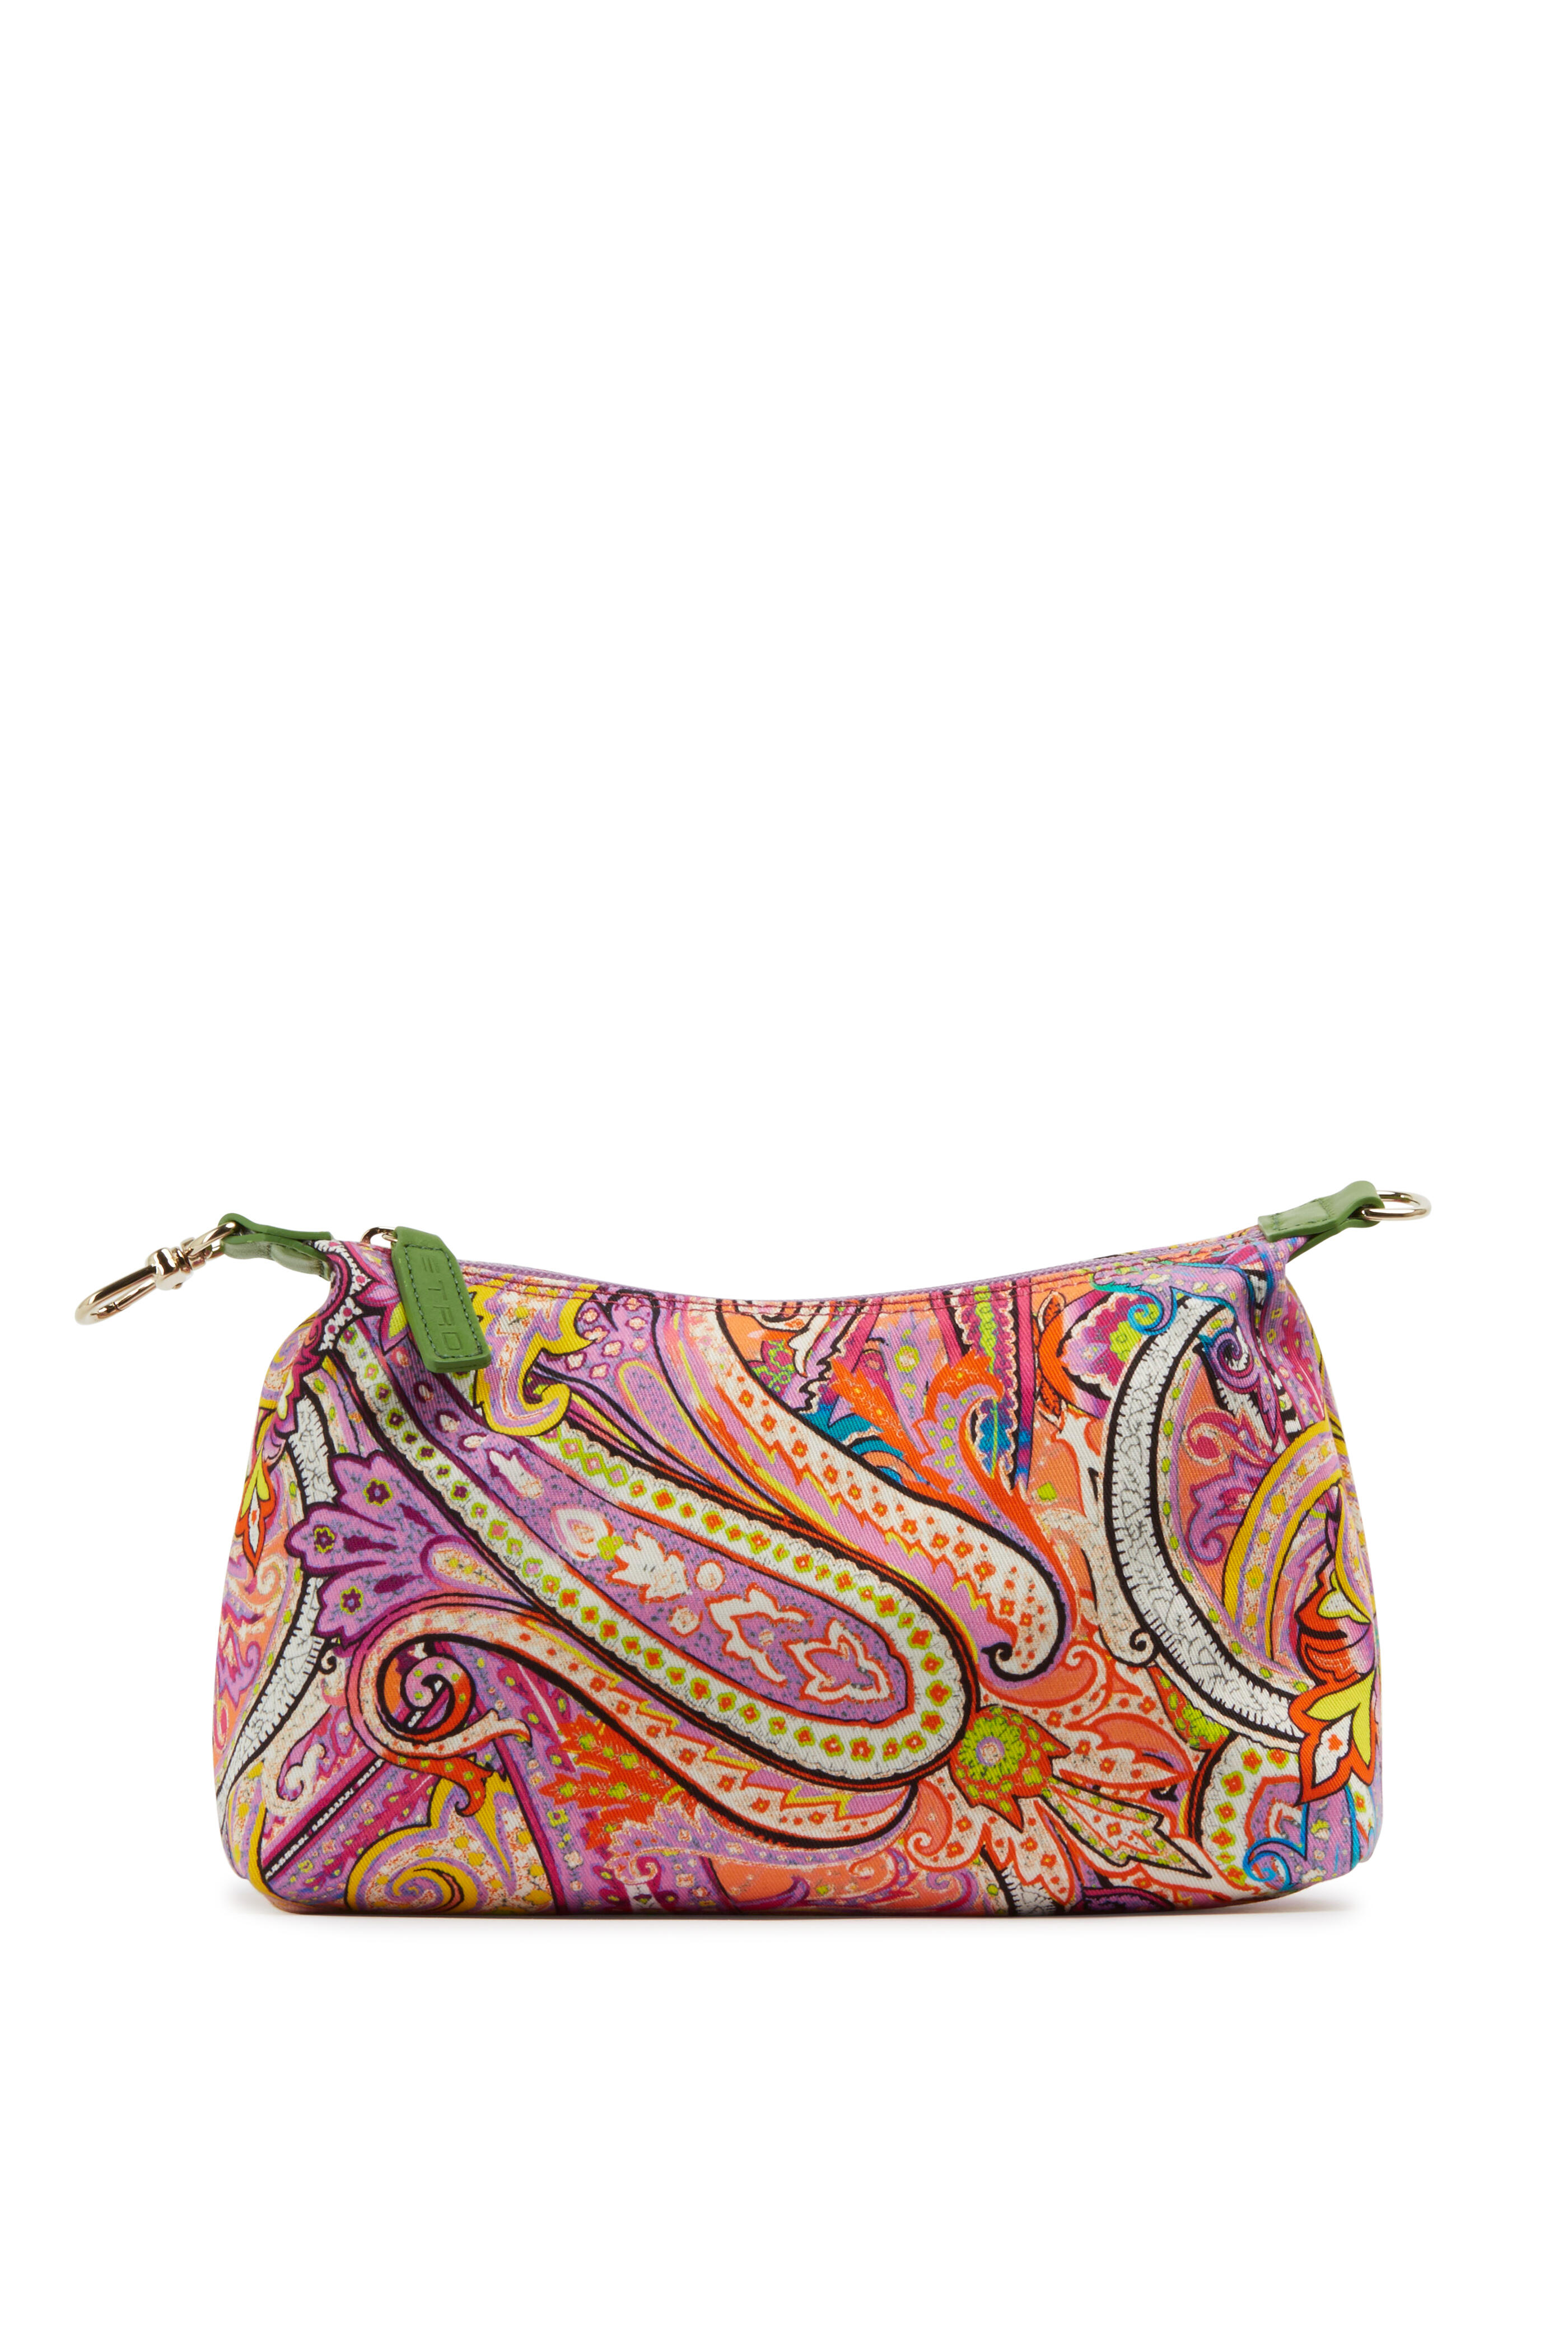 Cosmetic Mitchell Etro | Bag Paisley Canvas Stores Multicolored -